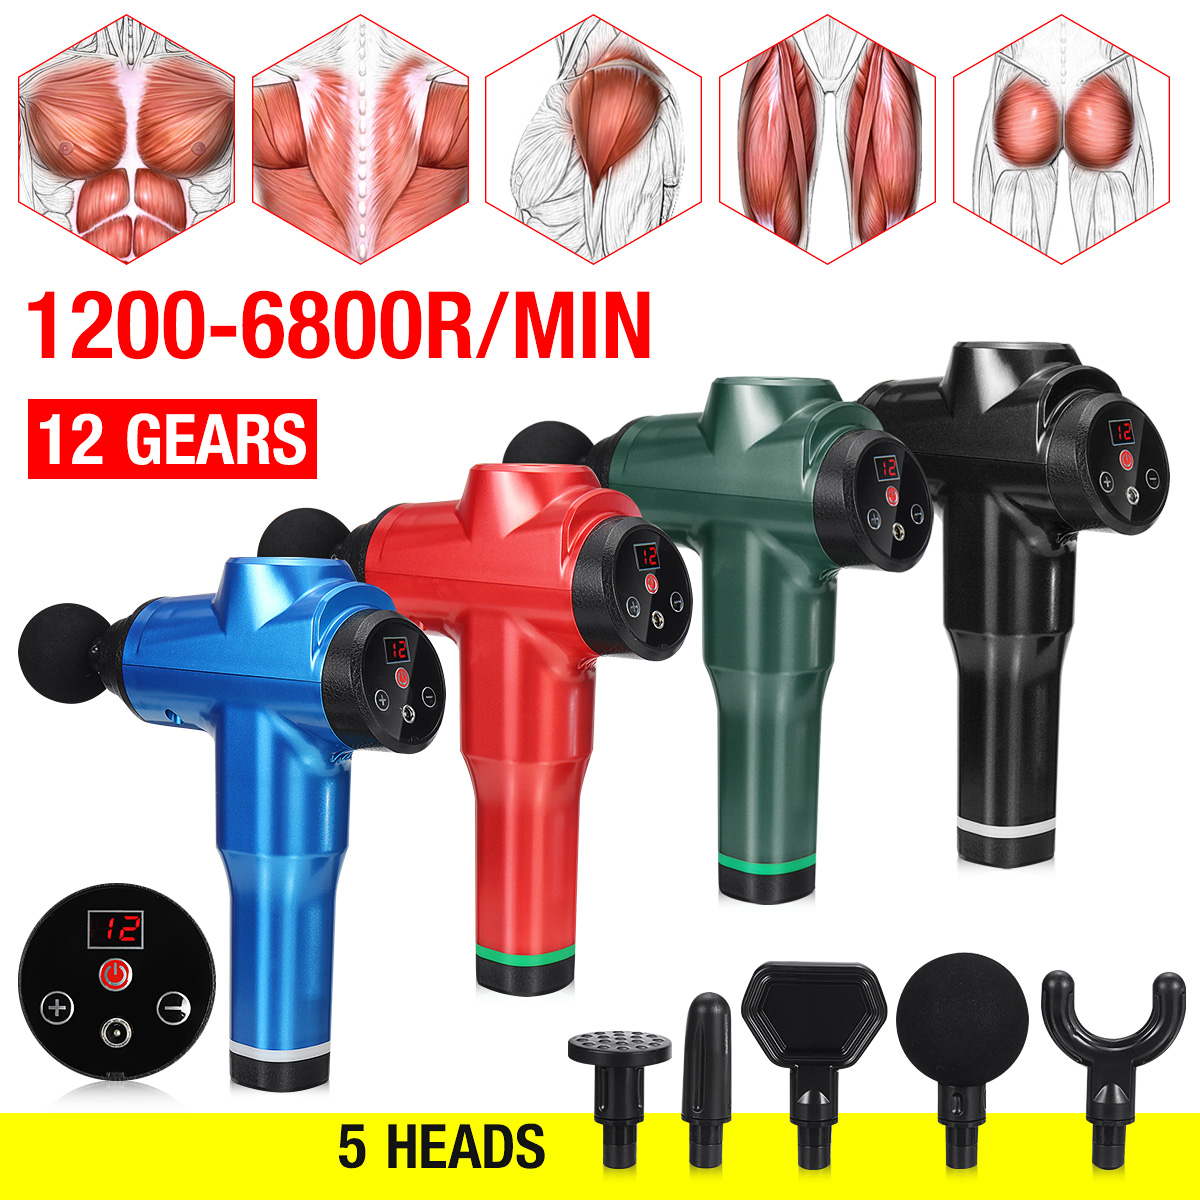 Display-12-Gear-Percussion-Massager-3600mAh-Vibration-Deep-Tissue-Muscle-Relaxation-Electric-Massage-1682388-3